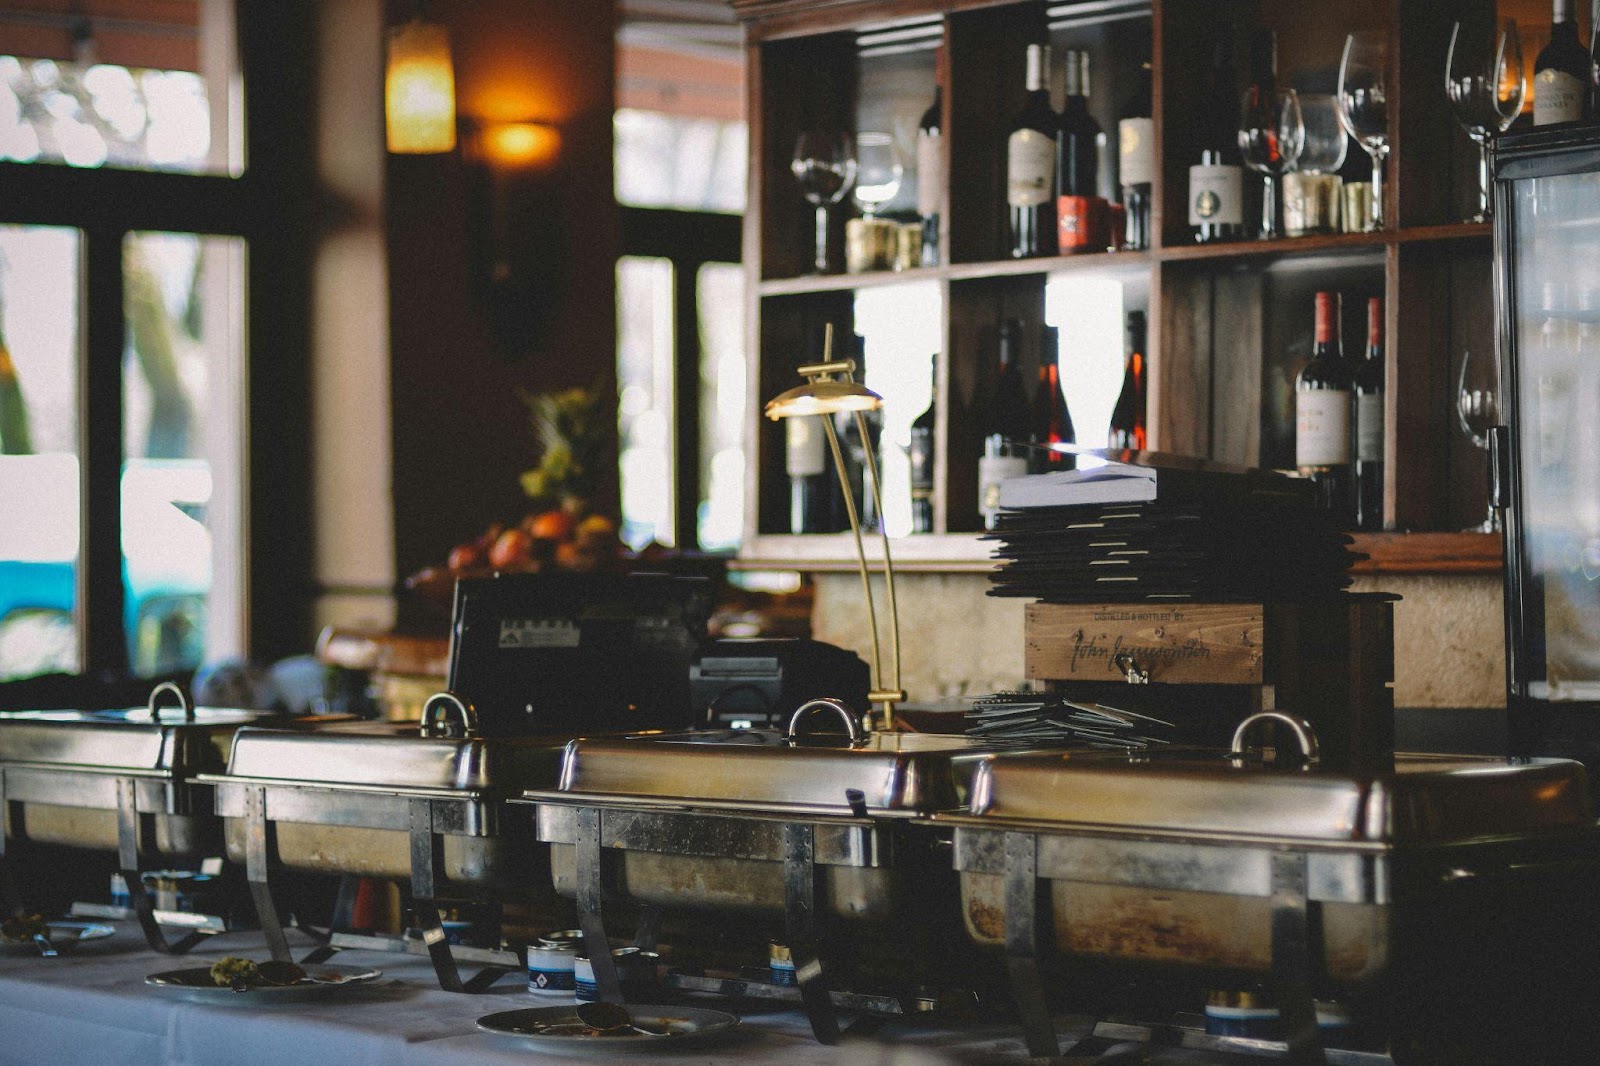 chafing dishes on a table